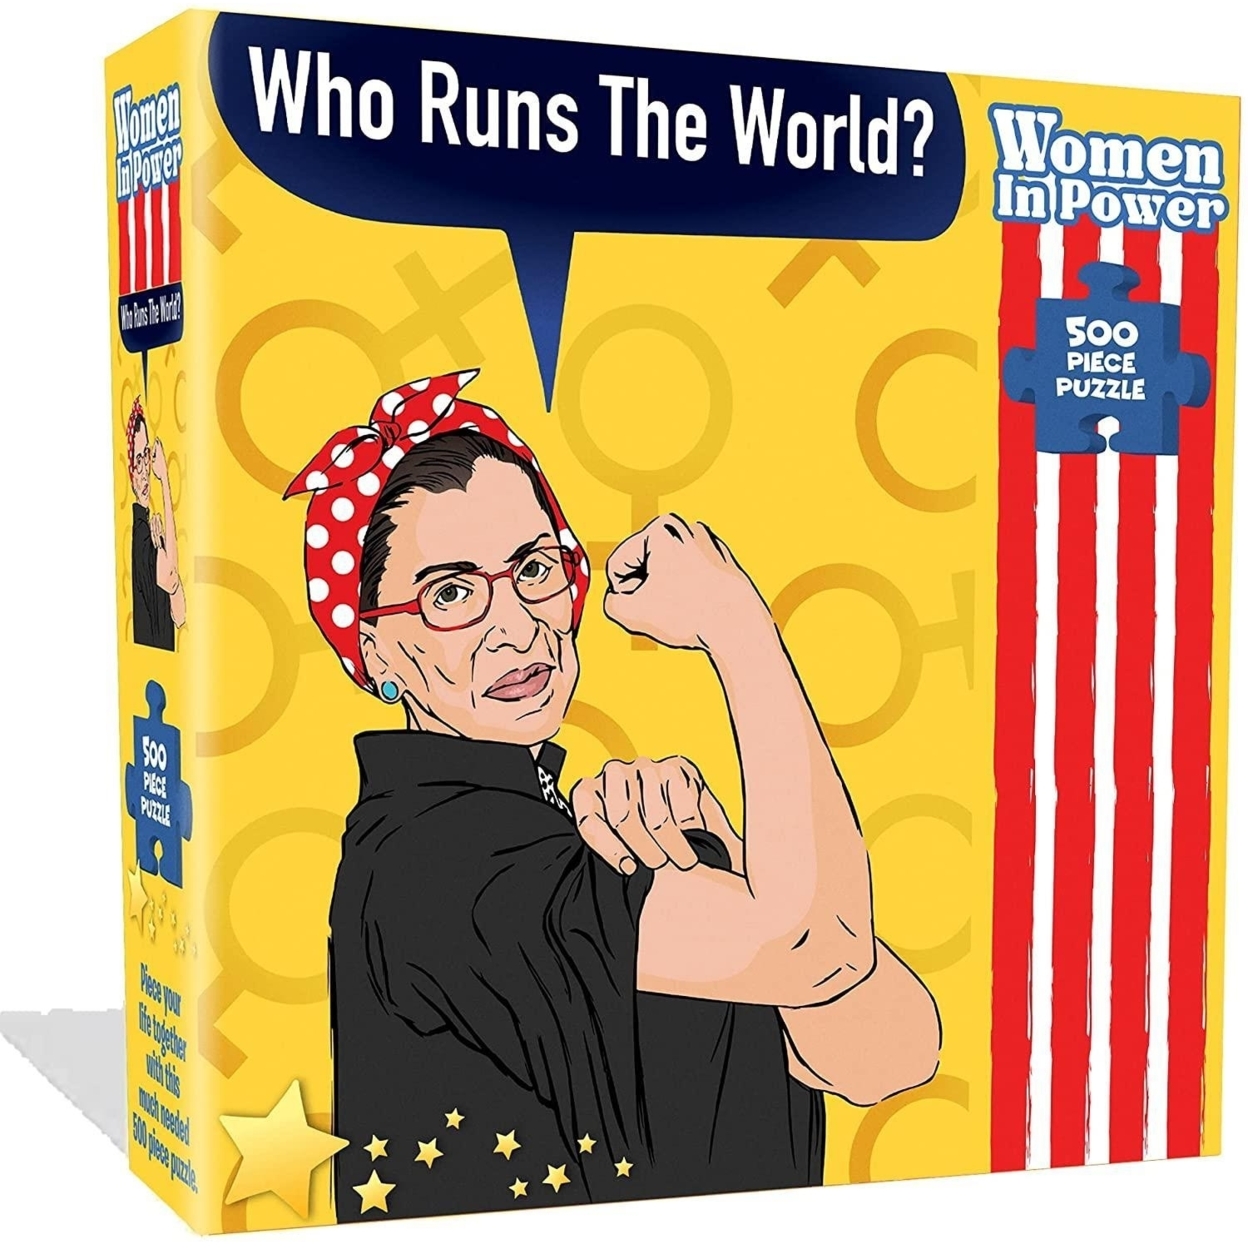 Ruth Bader Ginsberg RBG Jigsaw Puzzle 500pcs Women In Power Illustration Design All Ages Mighty Mojo